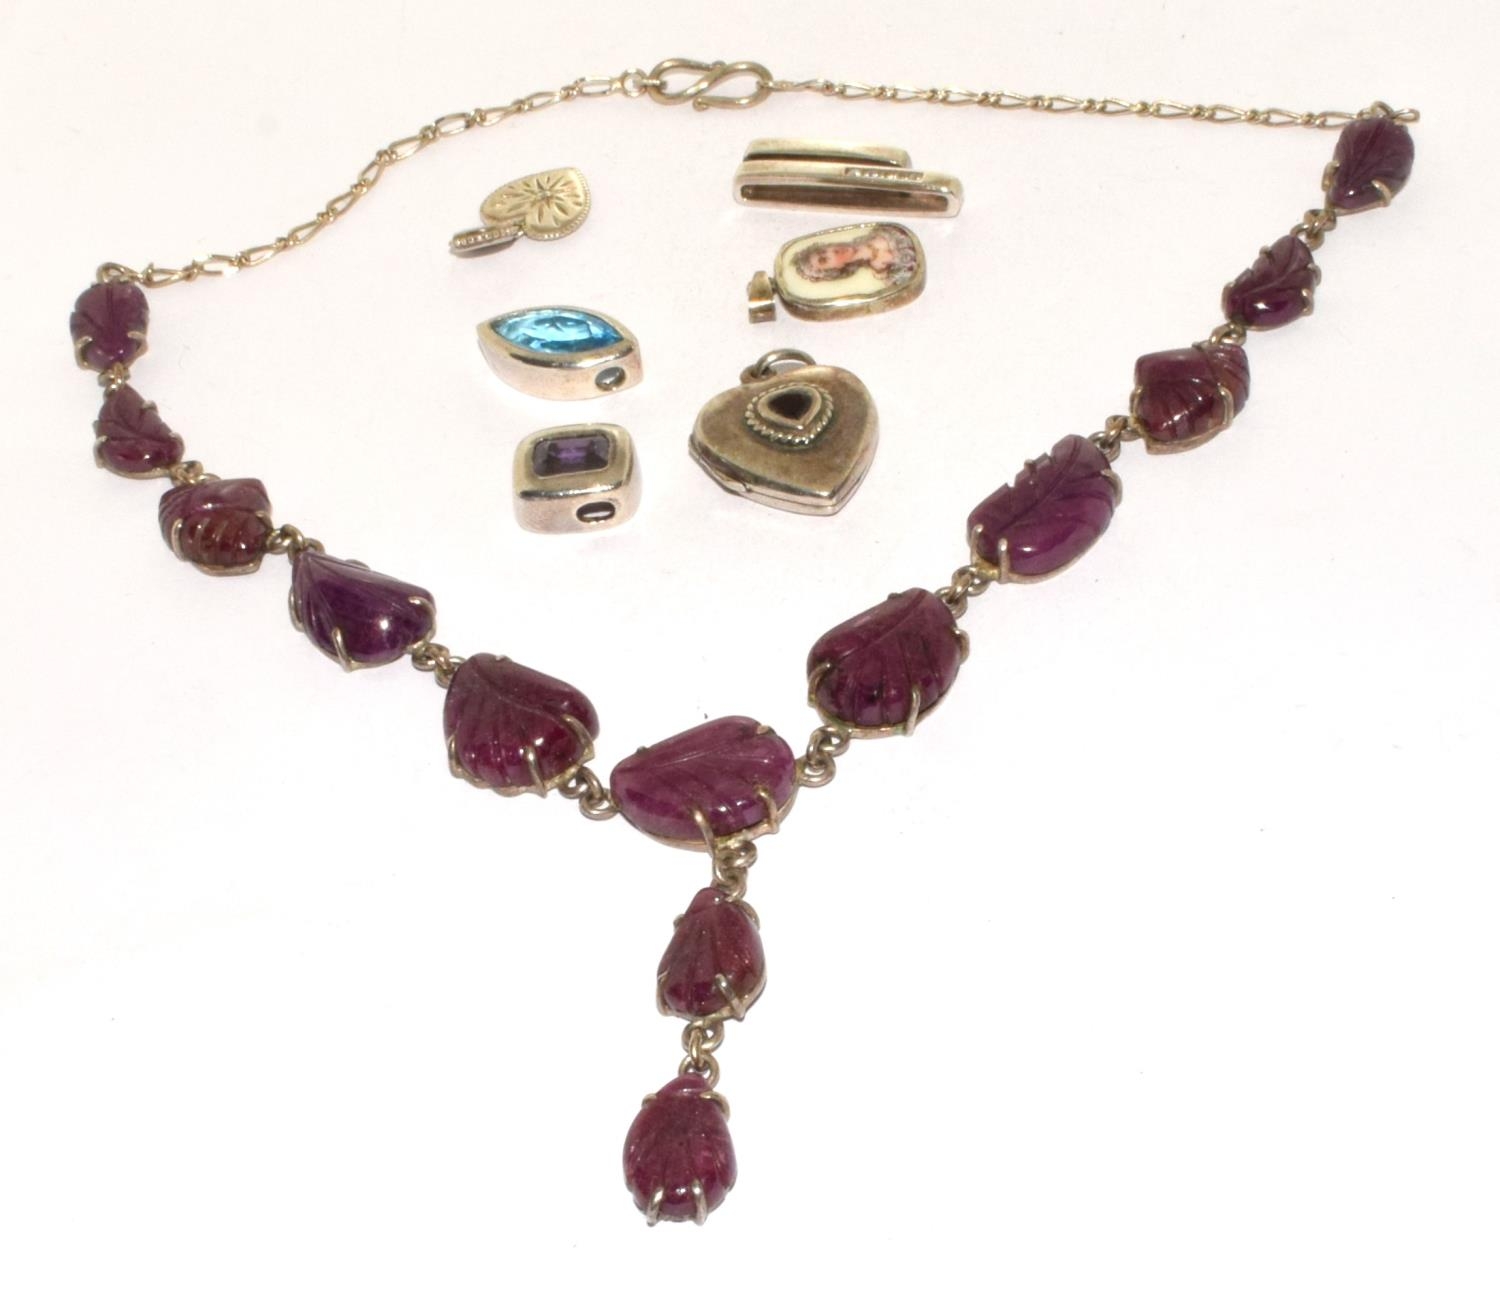 Silver Rough cut Ruby Necklace and 6 other silver pendants